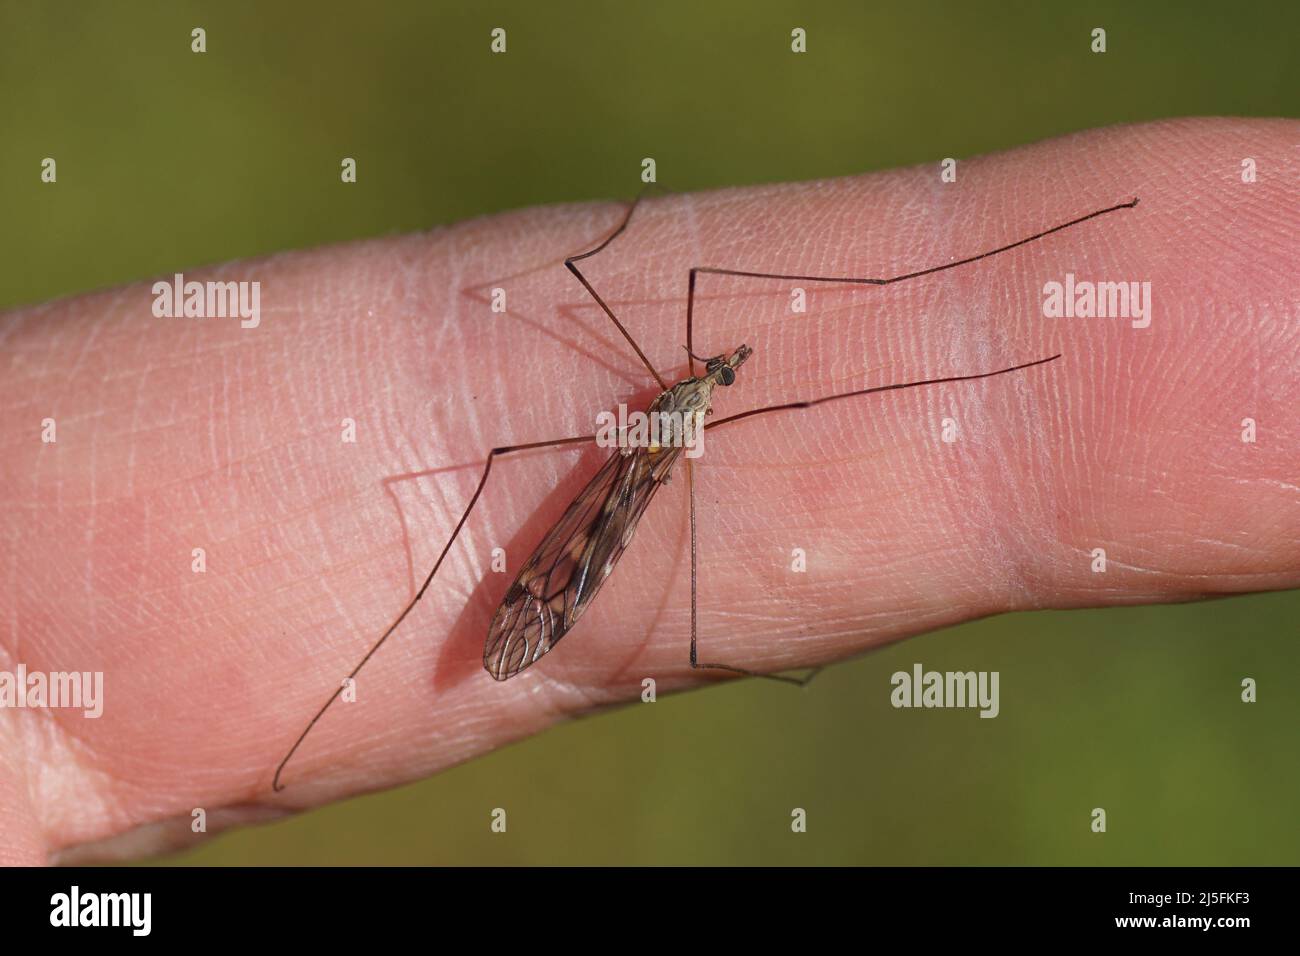 Male Crane fly Tipula rufina resting on a finger. Non biting!, Folded wings. Family Crane flies (Tipulidae).  Spring, Dutch garden, Netherlands. Stock Photo